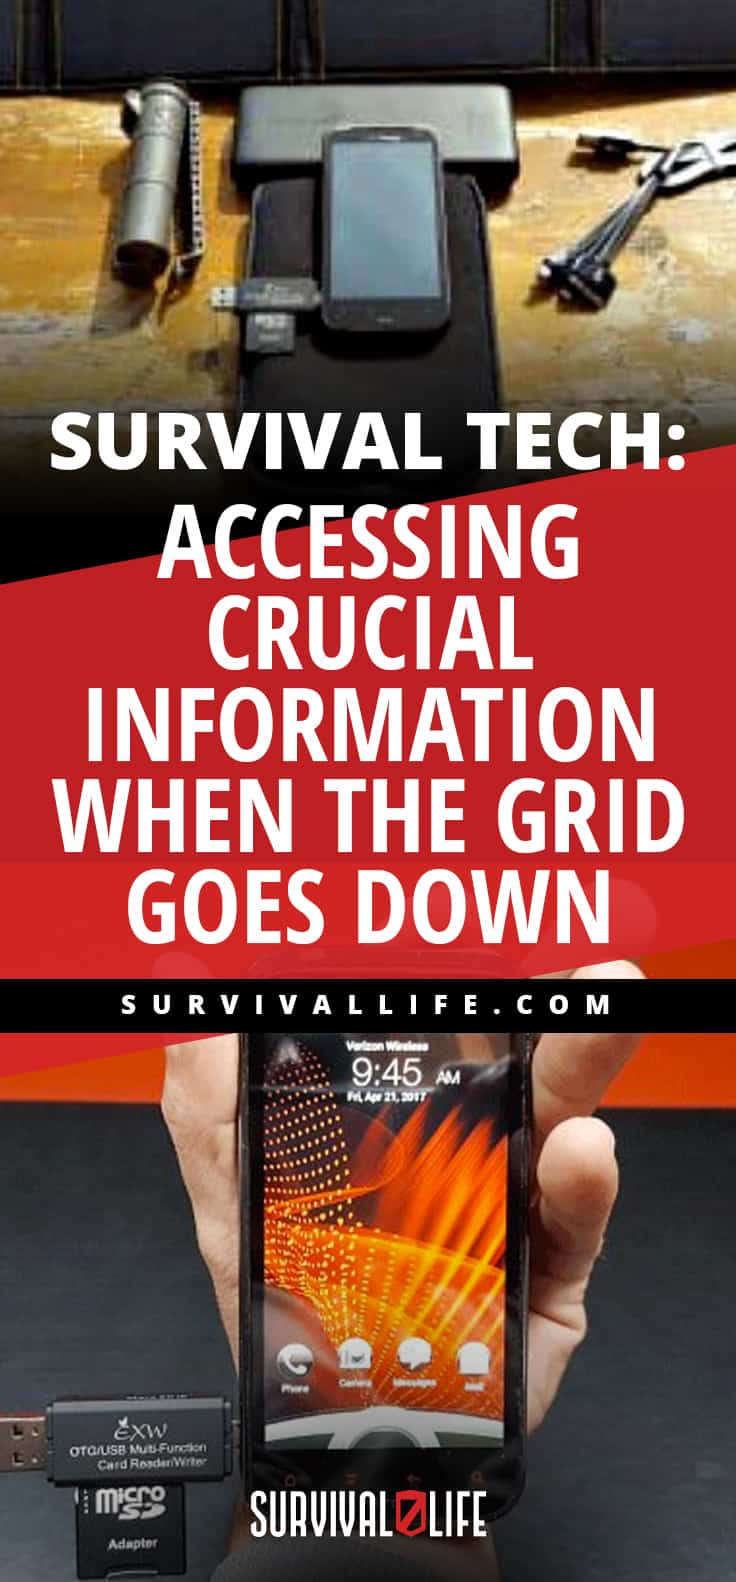 Survival Tech: Accessing Crucial Information When The Grid Goes Down